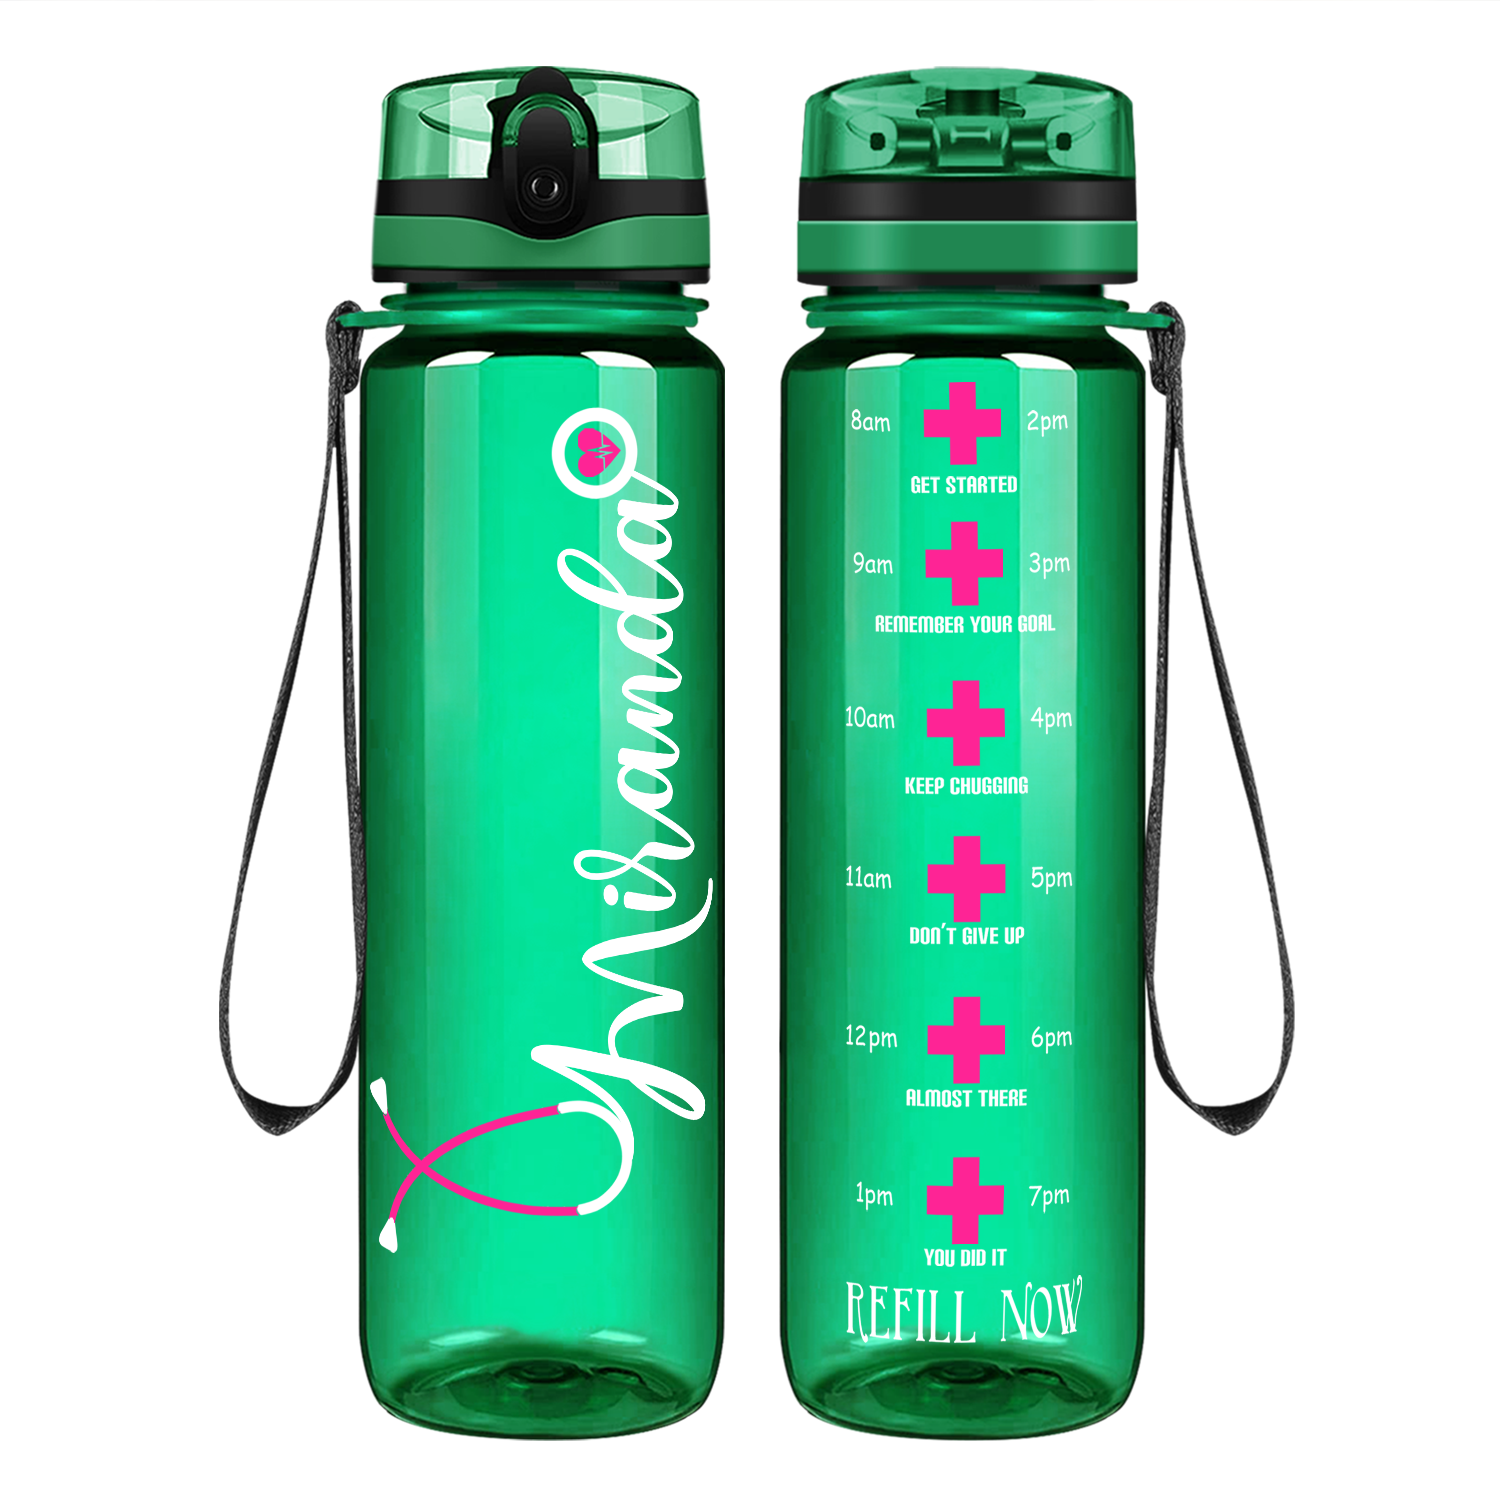 All I Need Today on 32oz Motivational Tracking Nurse Water Bottle - Cuptify